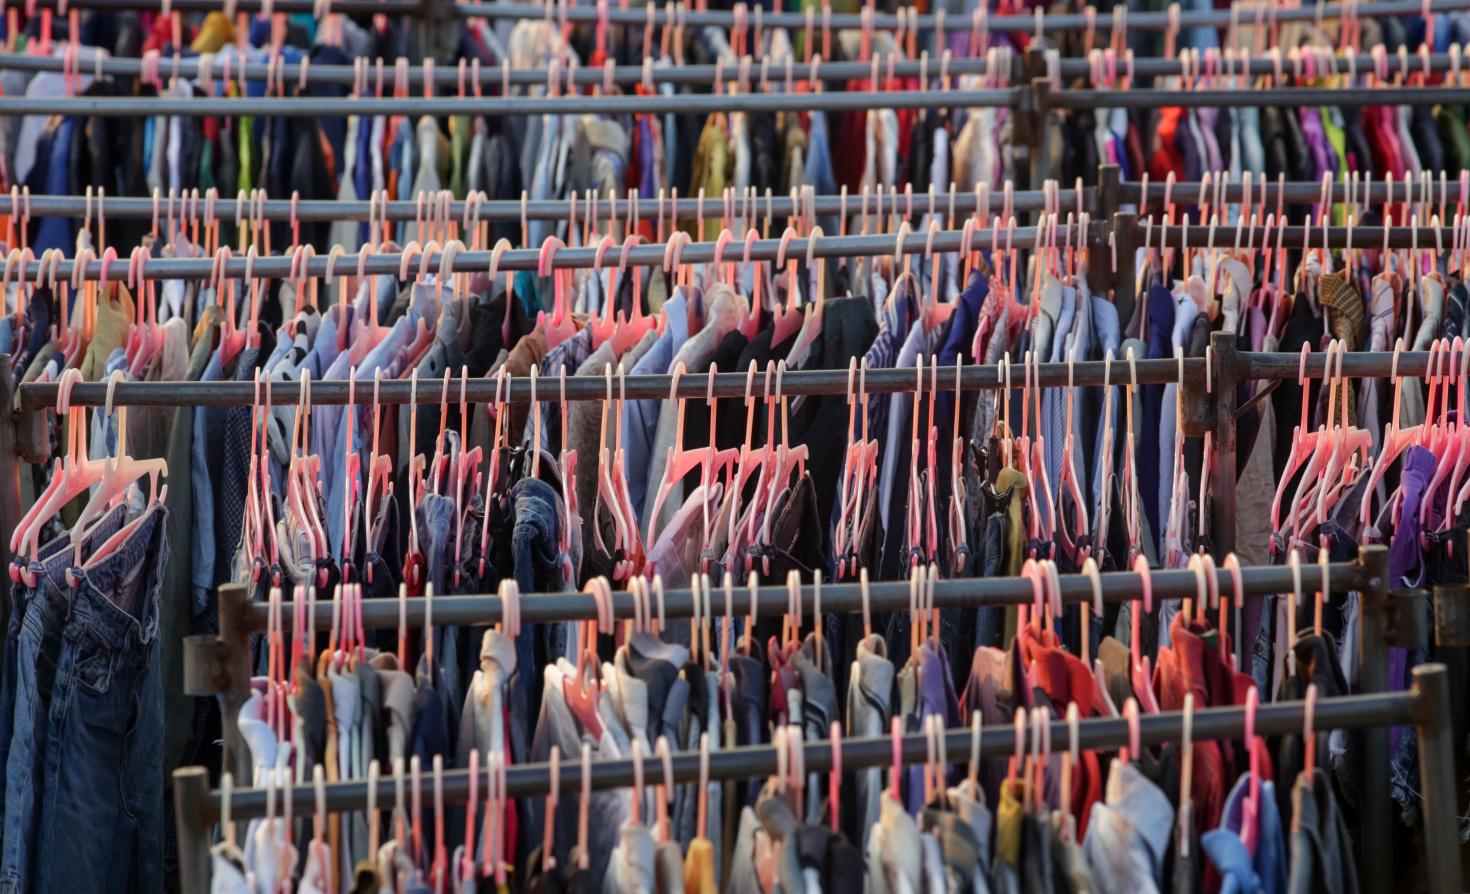 Garments on racks at a thrift store.